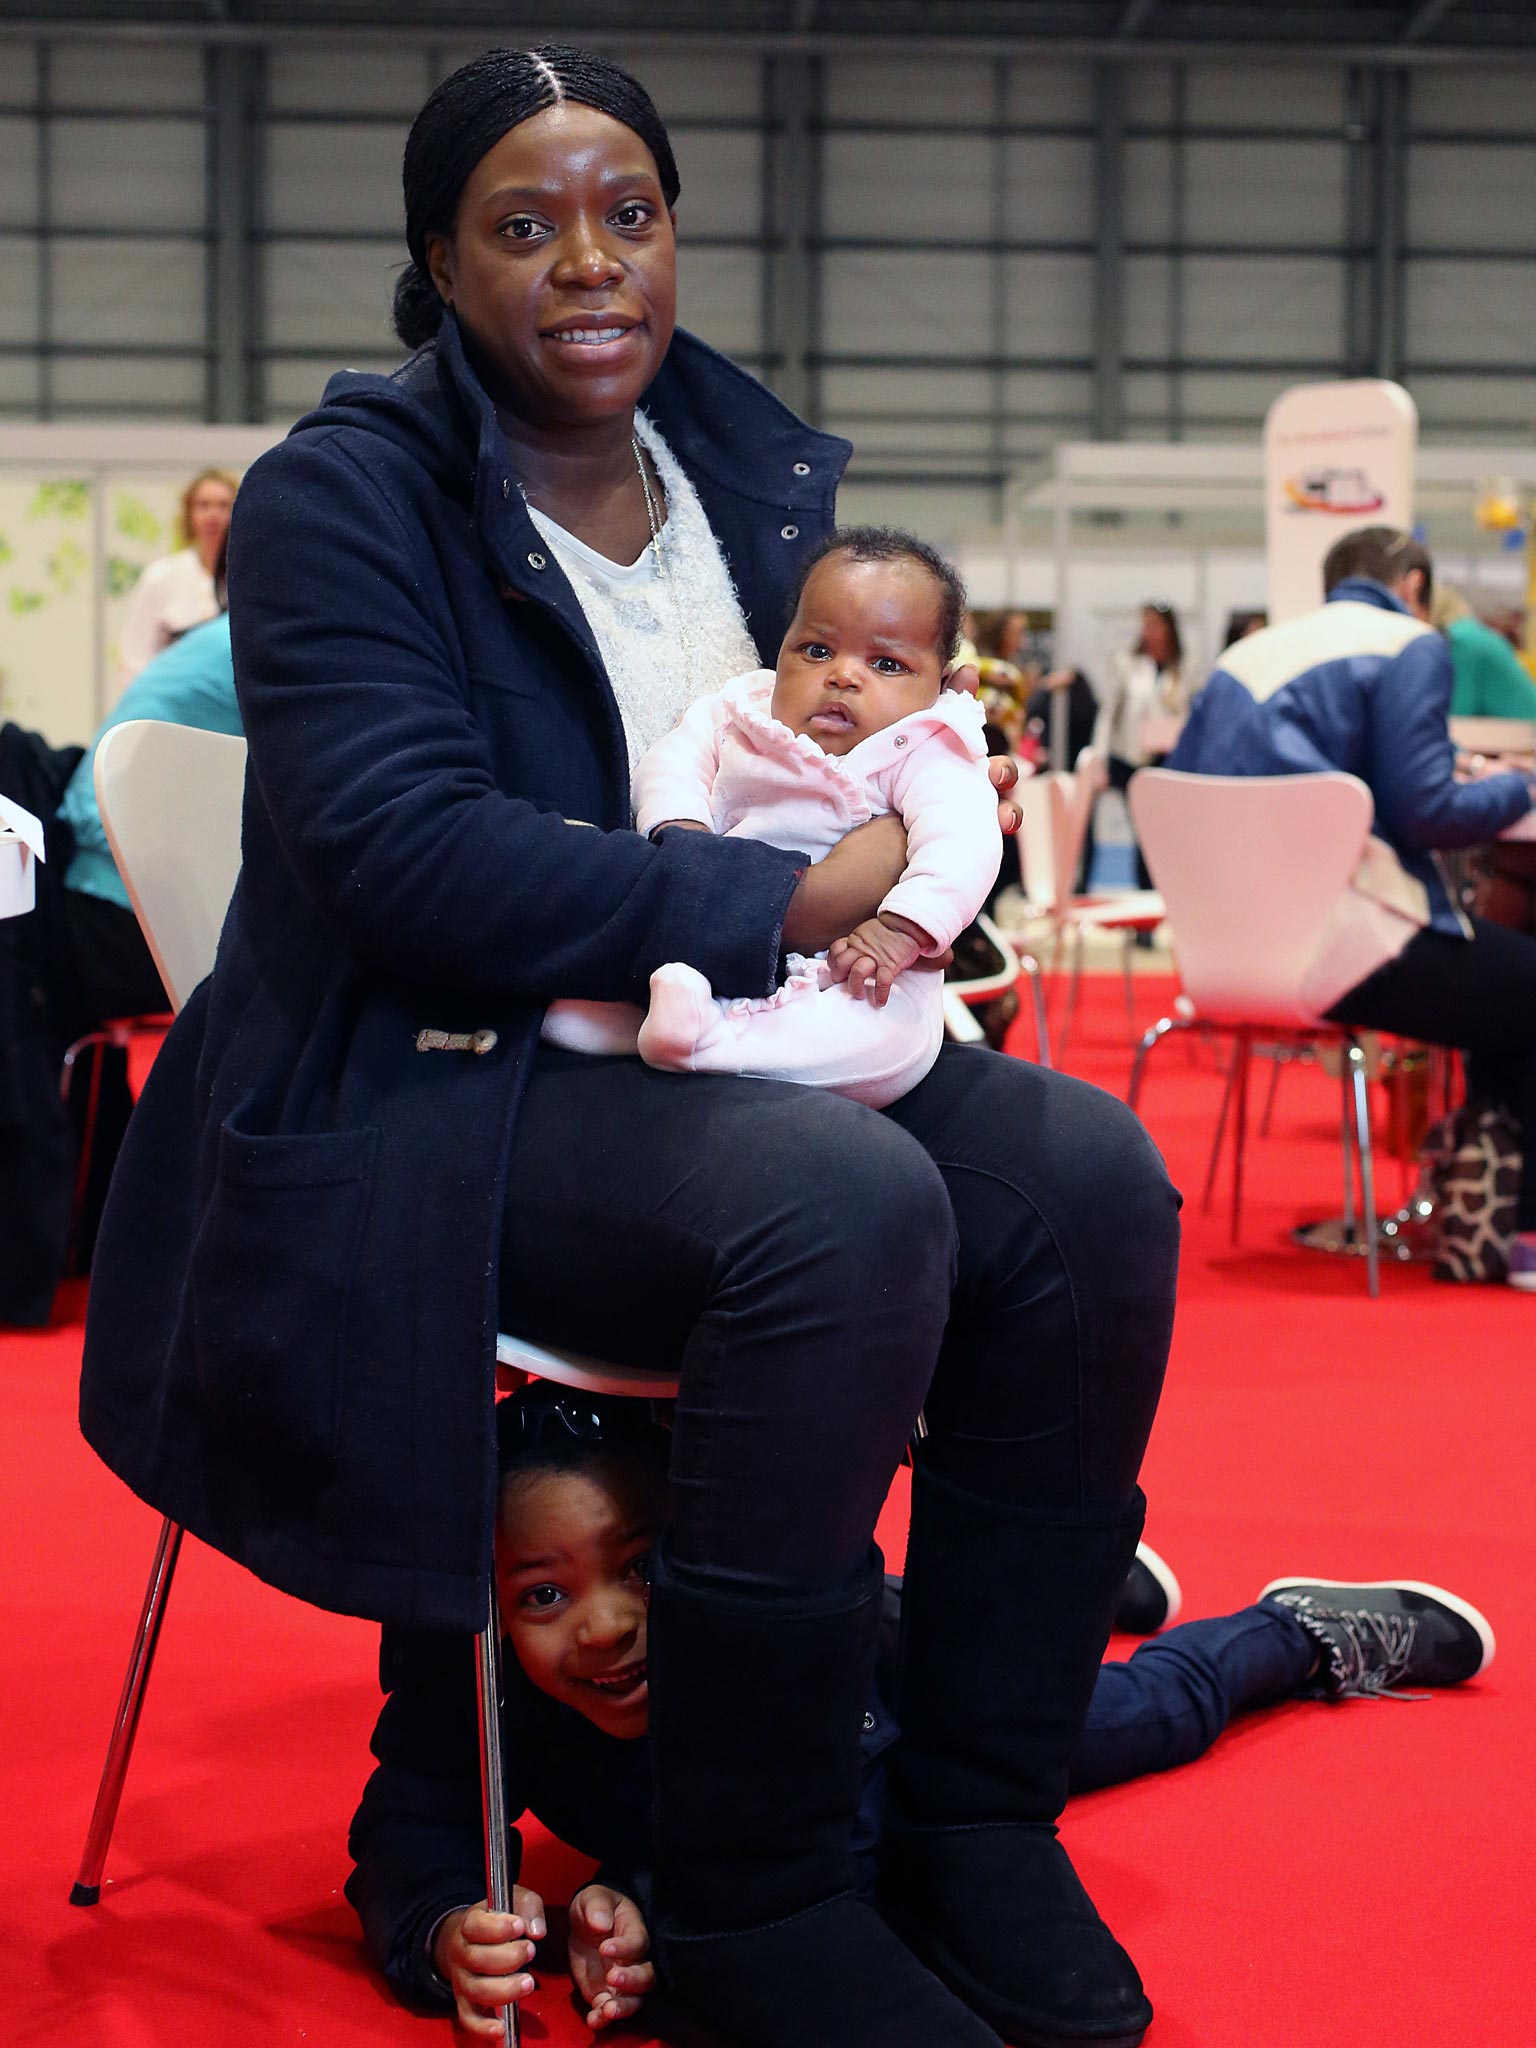 Jeanne Badinge, 30, with her children Thierry, four, and Celine, one
month, at the work and parenting show